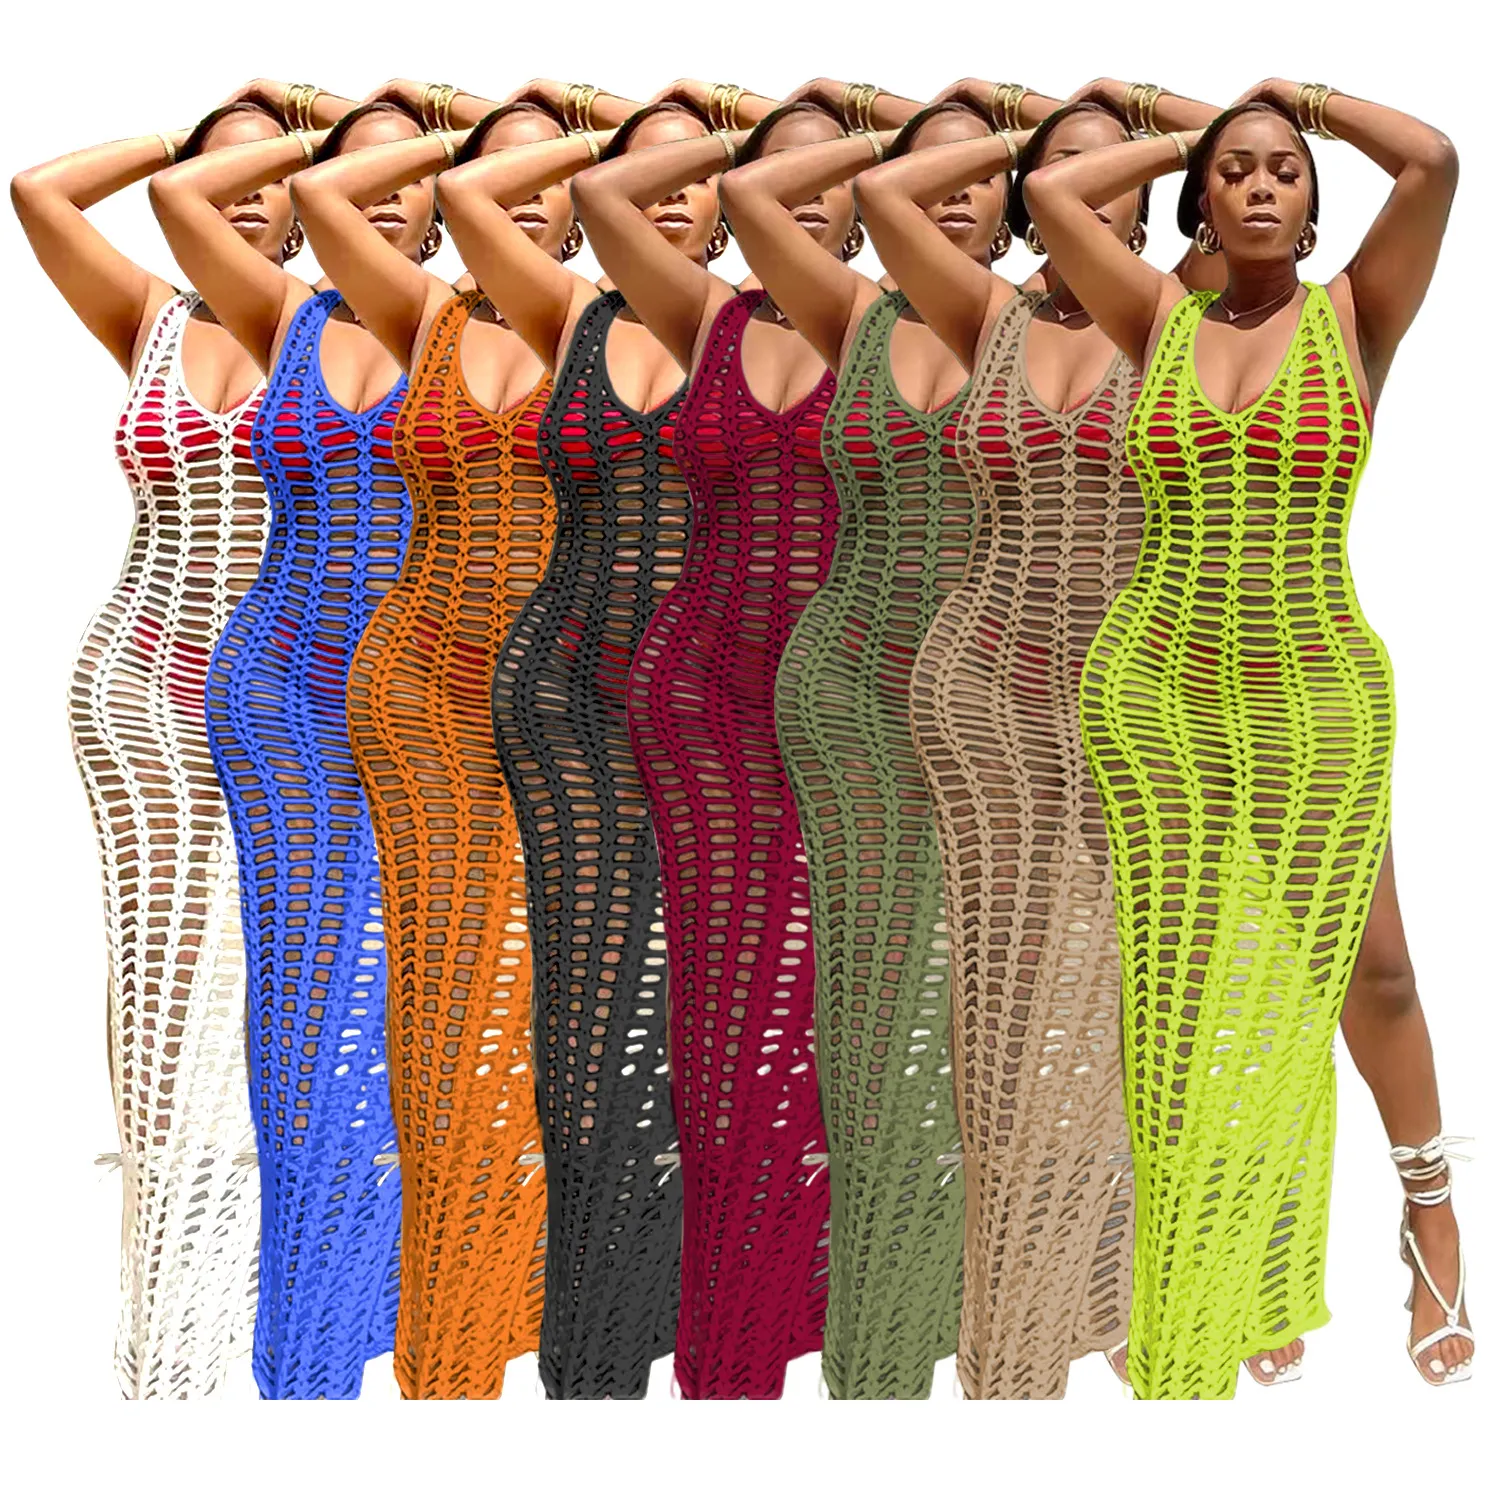 lovely wholesale7 color Swimsuit Cover Up Beach Wear Hand Crochet Hollow Out Maxi Dress Ladies Beach Cover Ups Dress